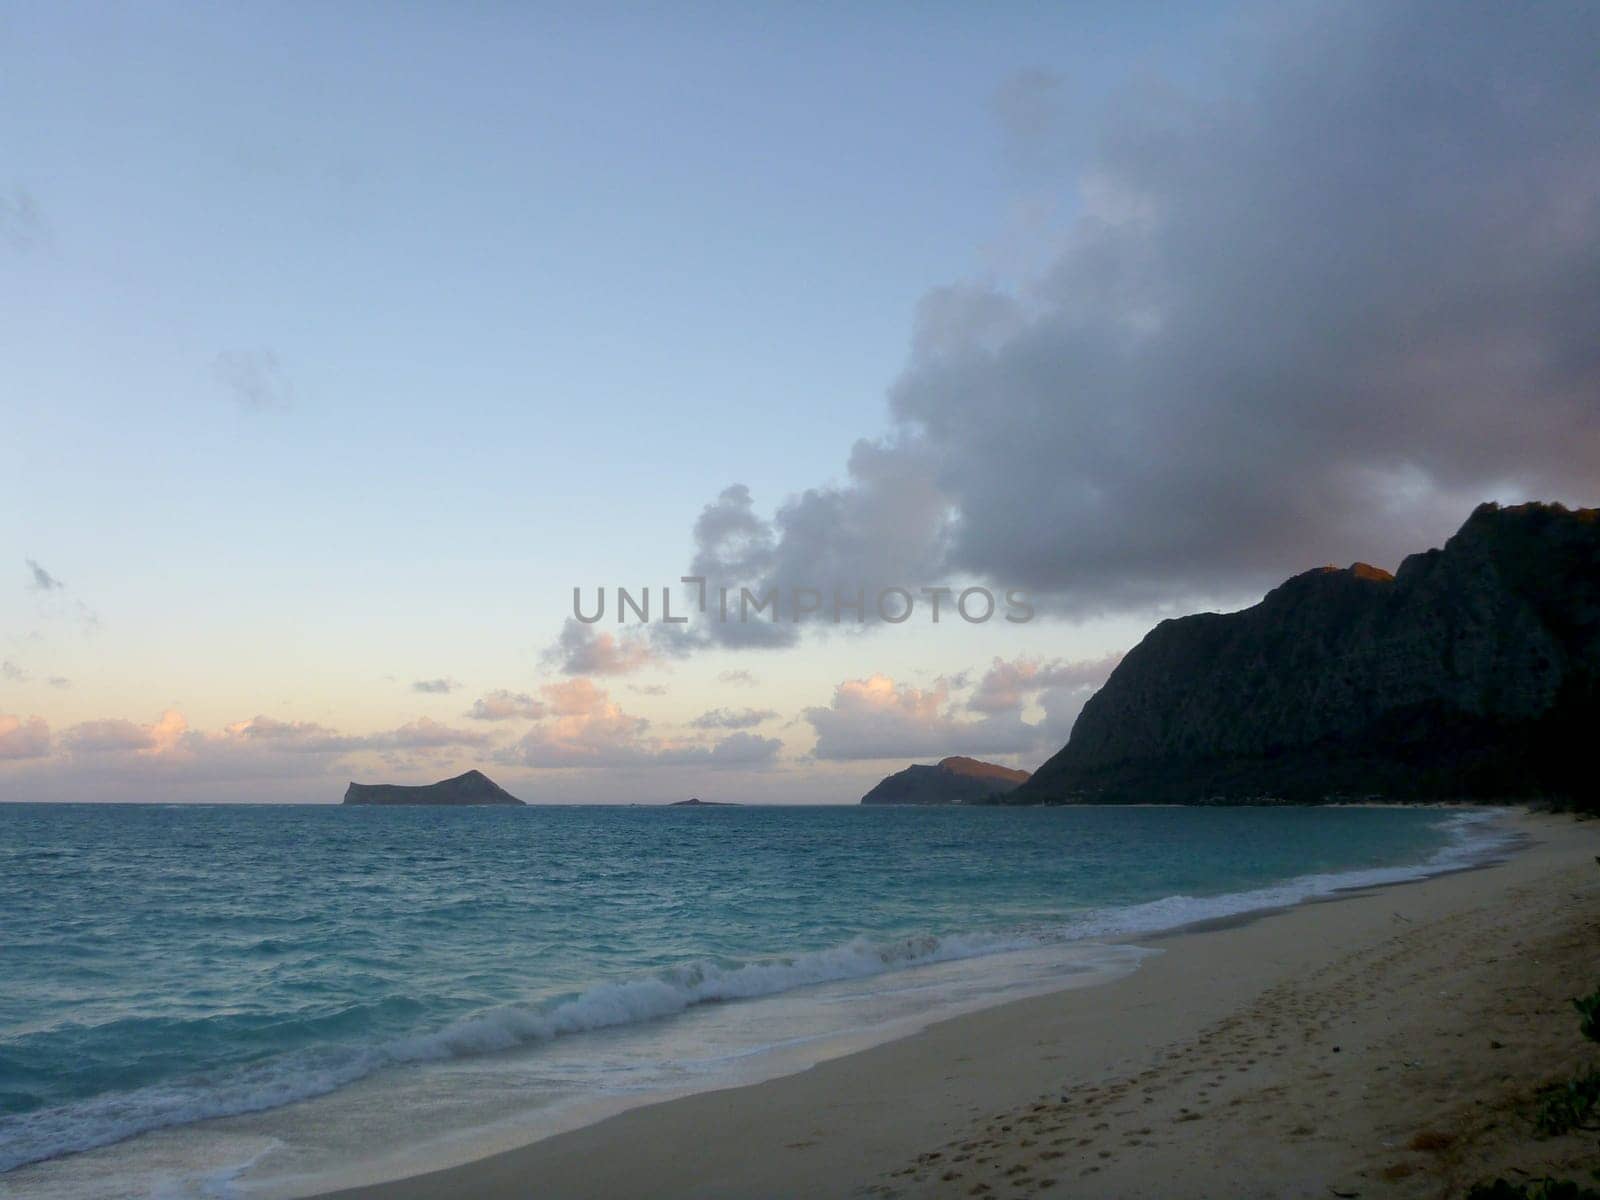 A tranquil photo of Waimanalo Beach, a scenic beach on the east coast of Oahu, Hawaii. The photo shows the ocean and the beach at dusk, with a soft light and a gentle breeze. The ocean is a blue-green color with white waves crashing onto the shore. The beach is sandy and appears to be empty. The sky is a light blue with a few clouds. The background consists of a mountain range with a few palm trees. The photo captures the beauty and the calmness of nature.